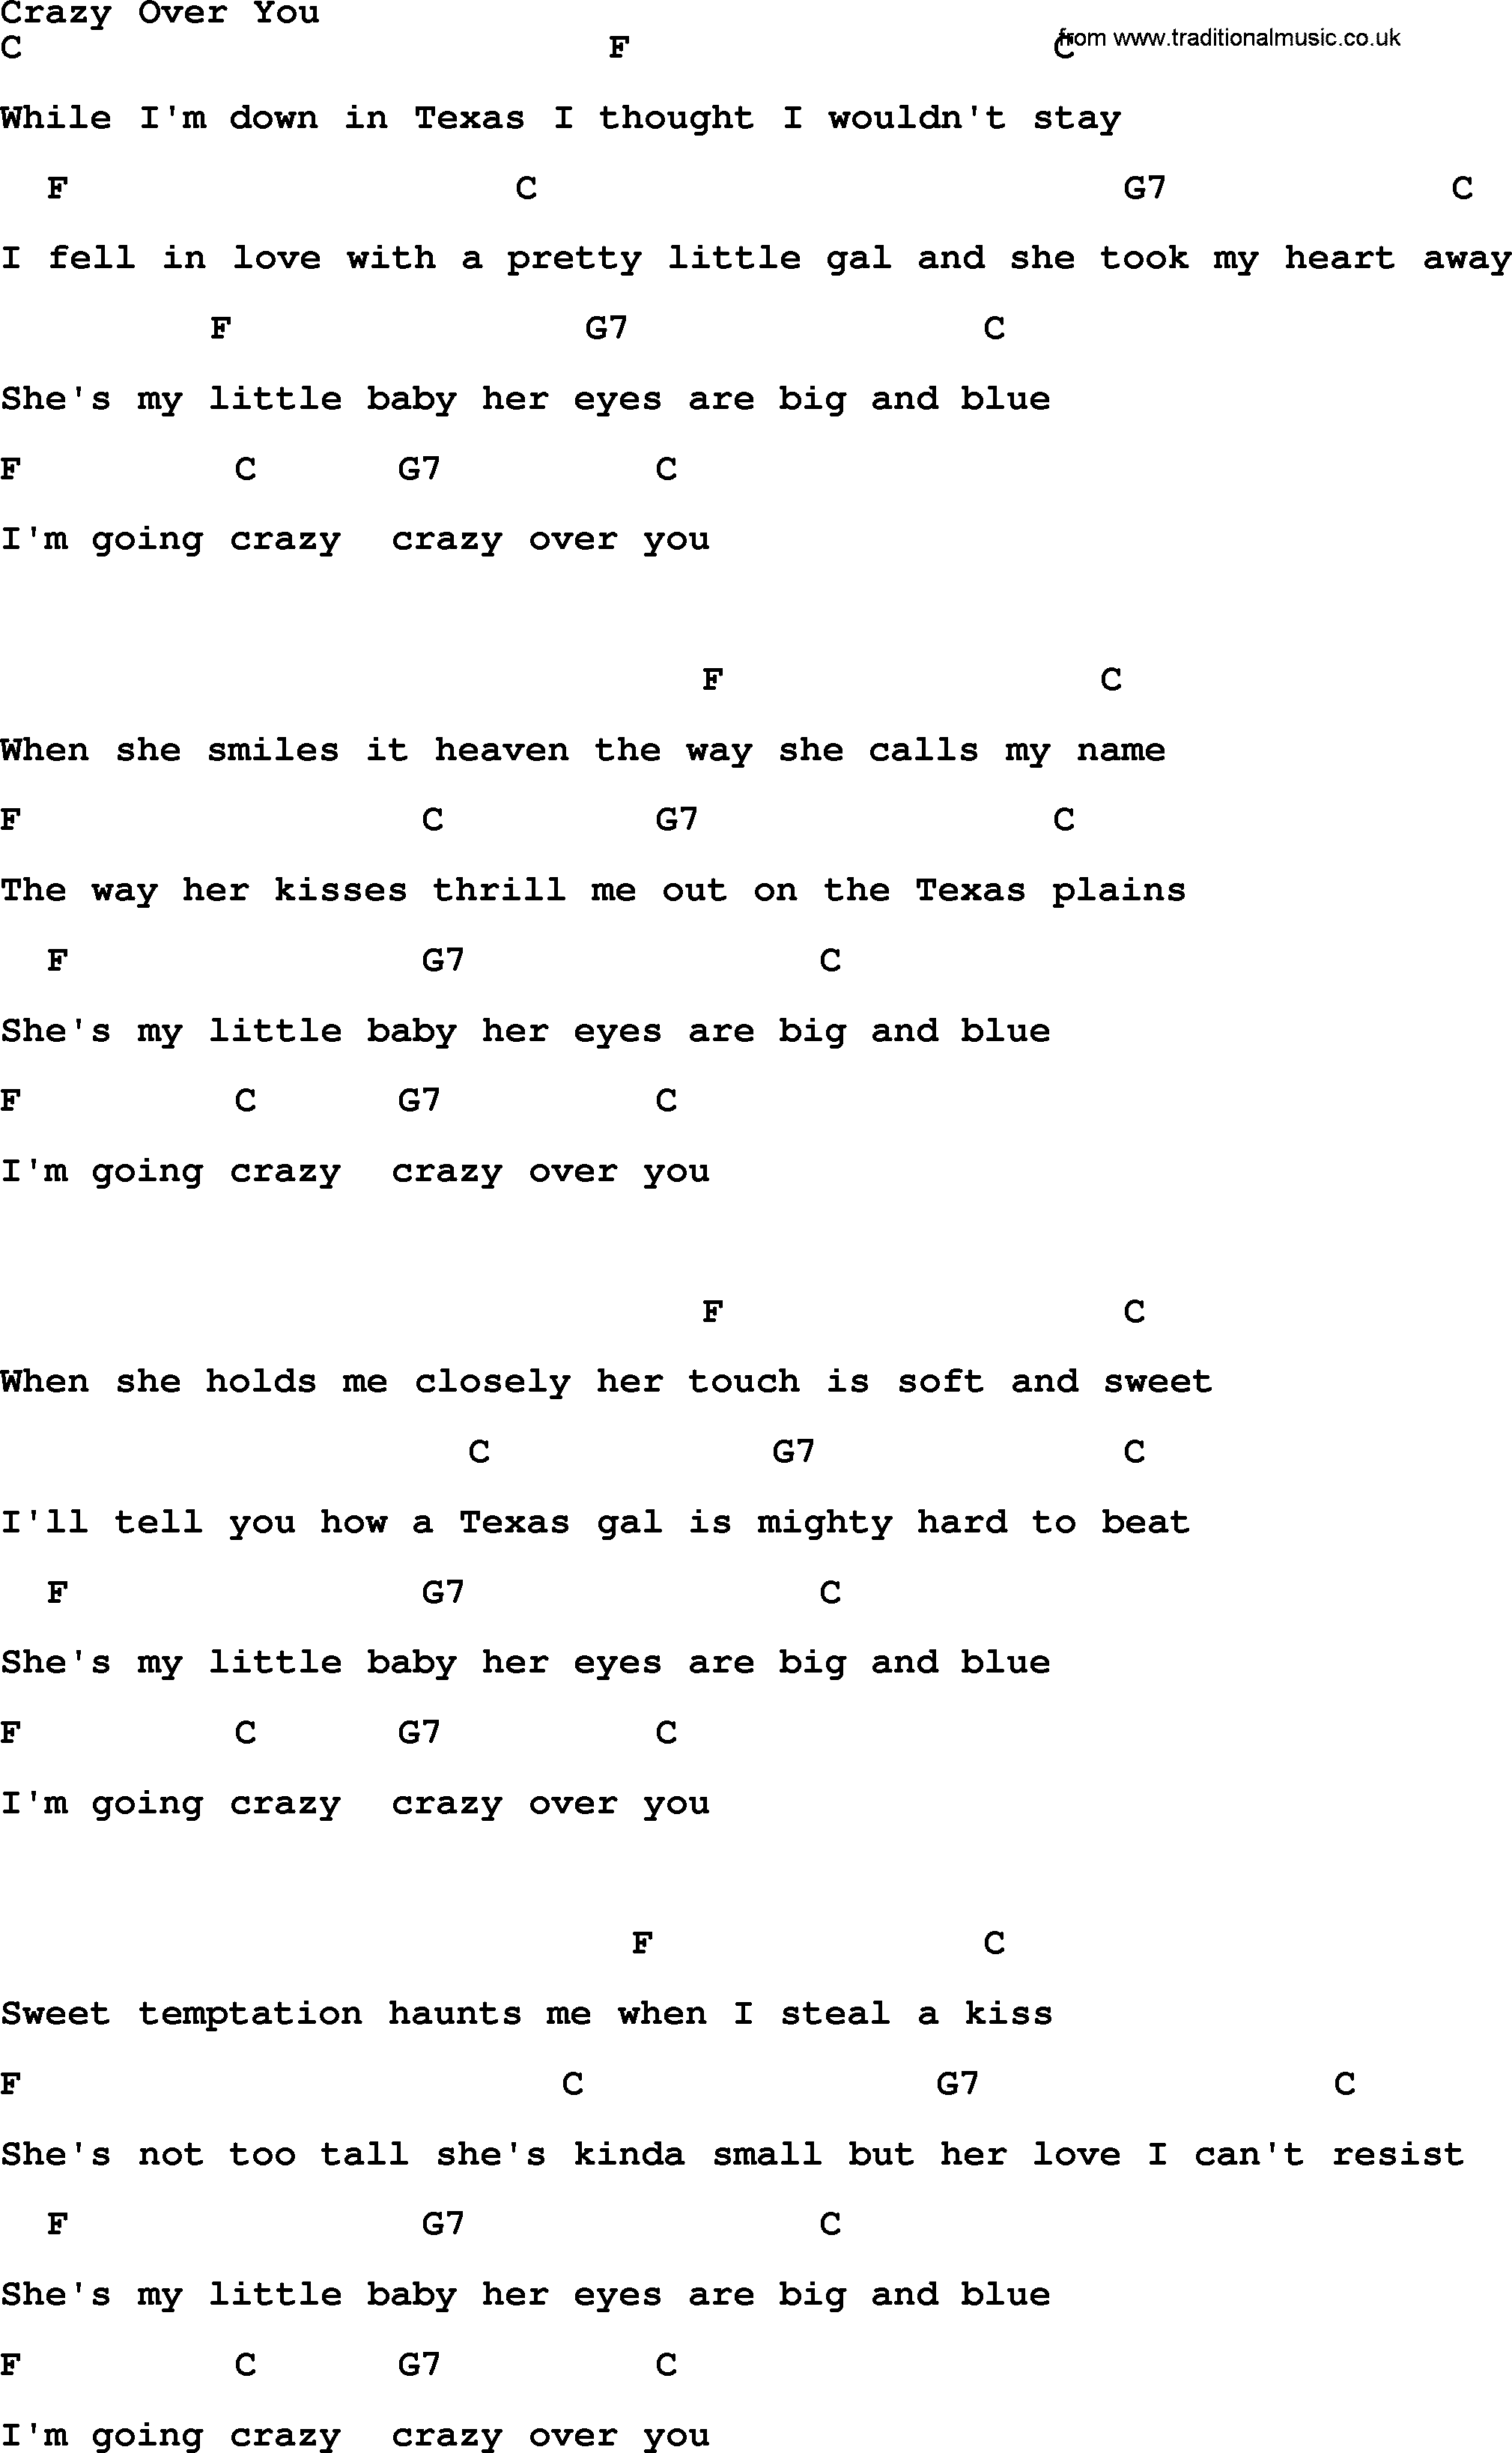 Bluegrass song: Crazy Over You, lyrics and chords